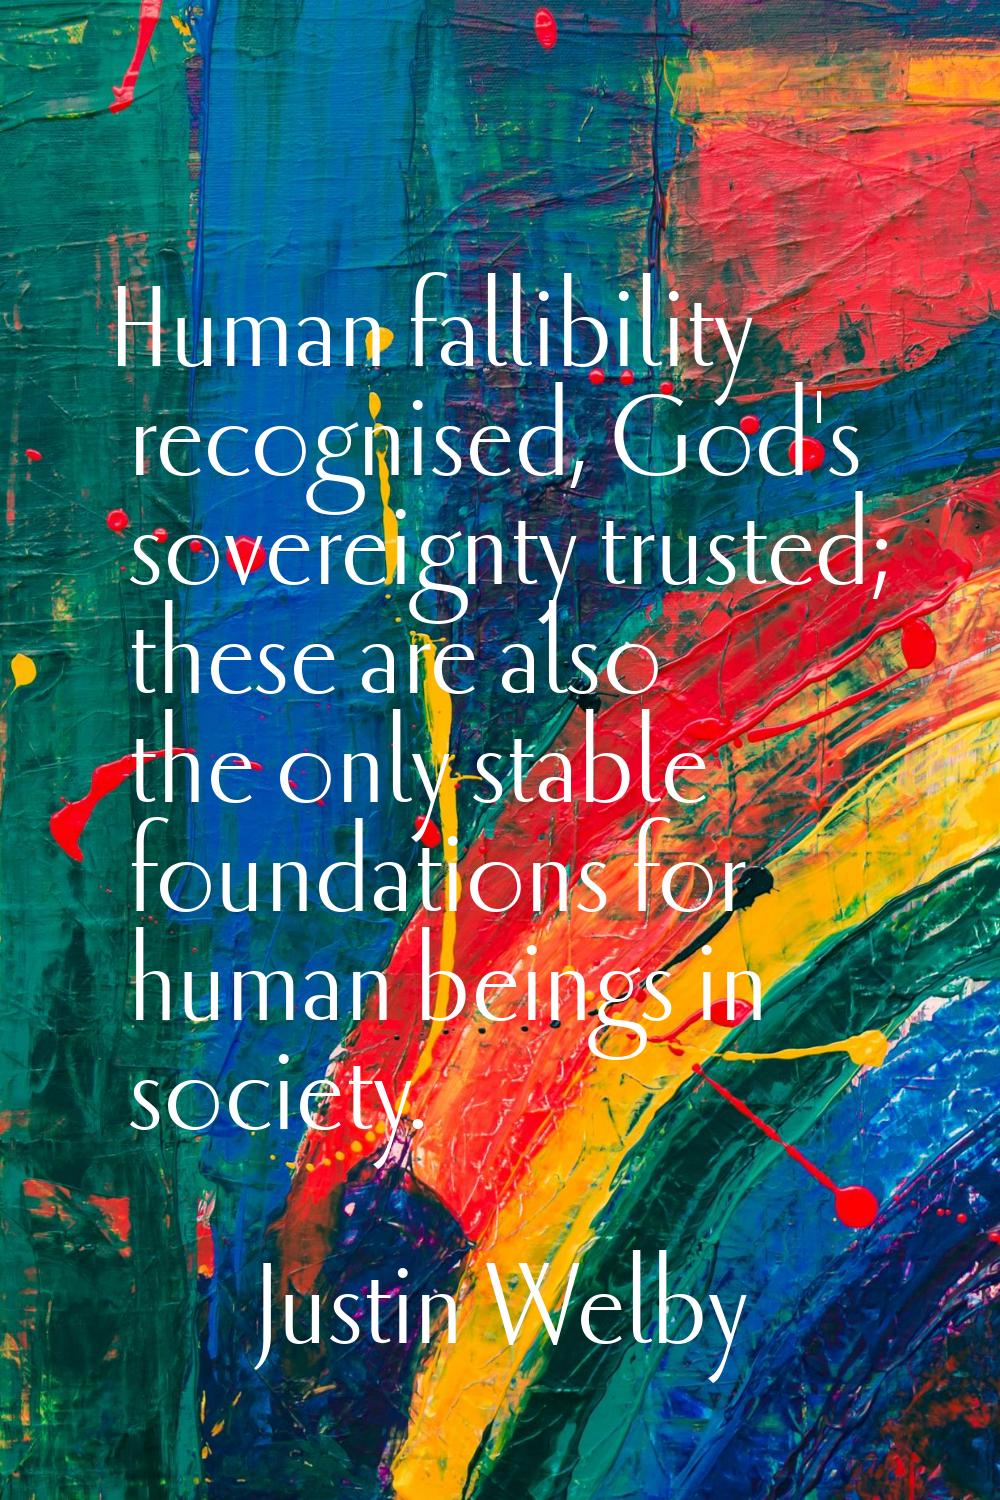 Human fallibility recognised, God's sovereignty trusted; these are also the only stable foundations